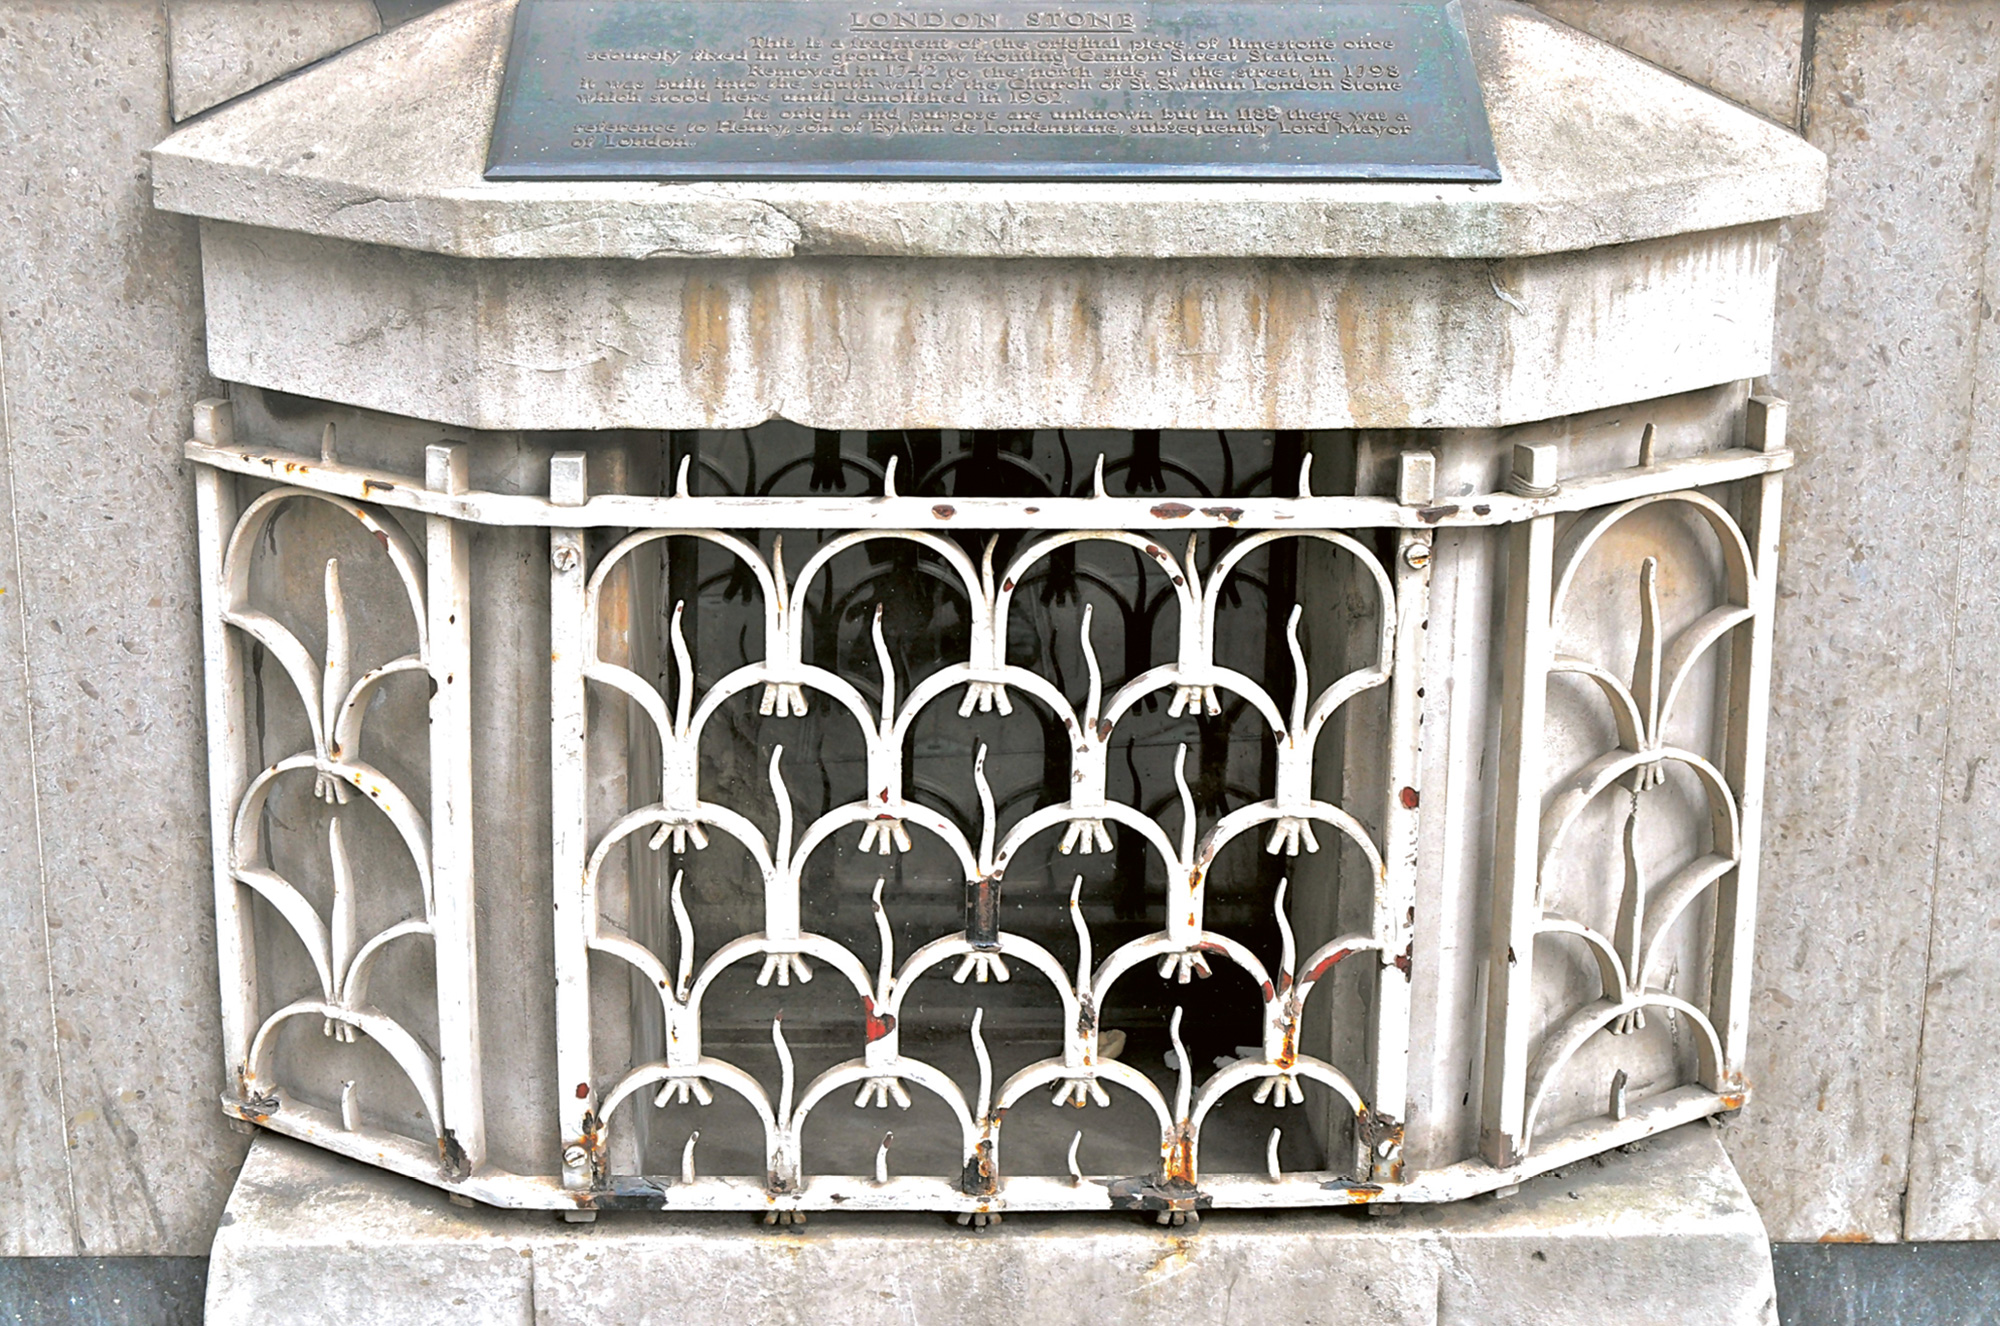 A photograph of the London Stone in its current state: encased in an iron fence and topped with a plaque.